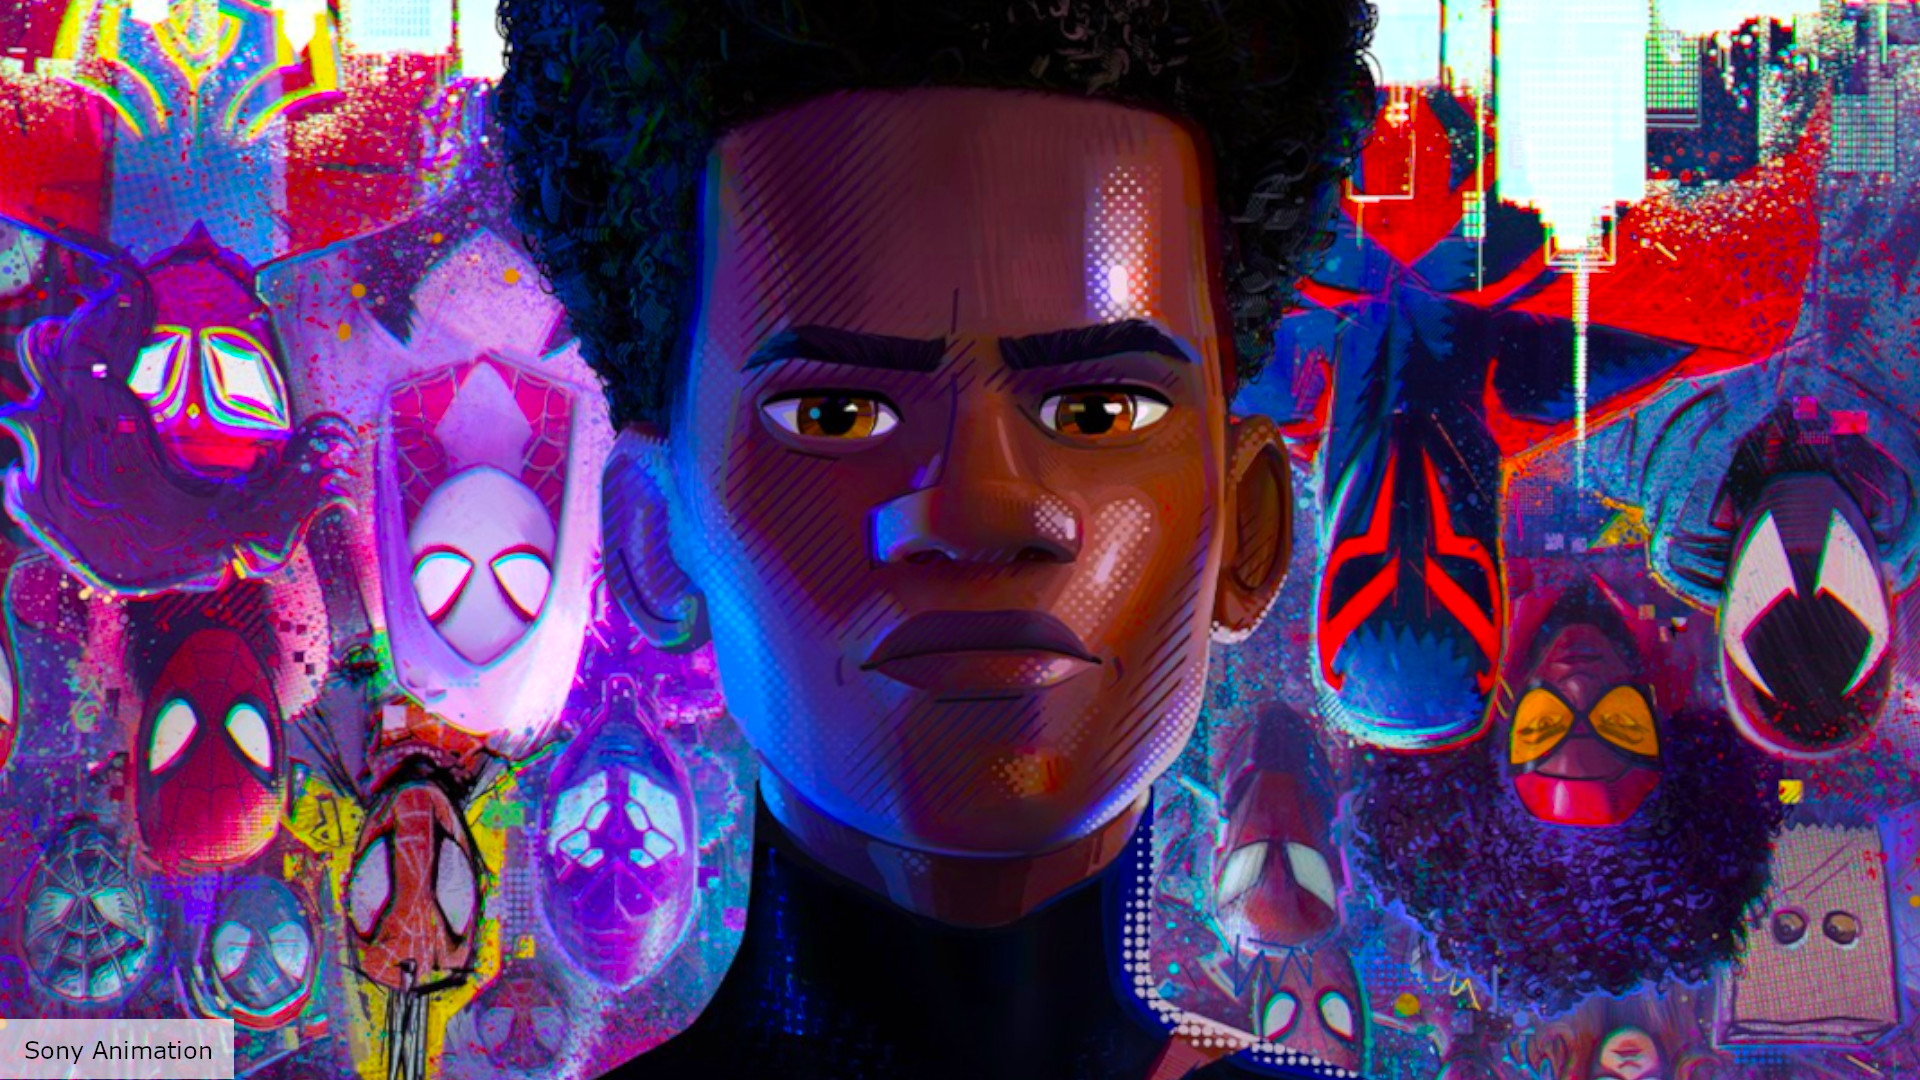 What Earth is Miles Morales from?. The Digital Fix